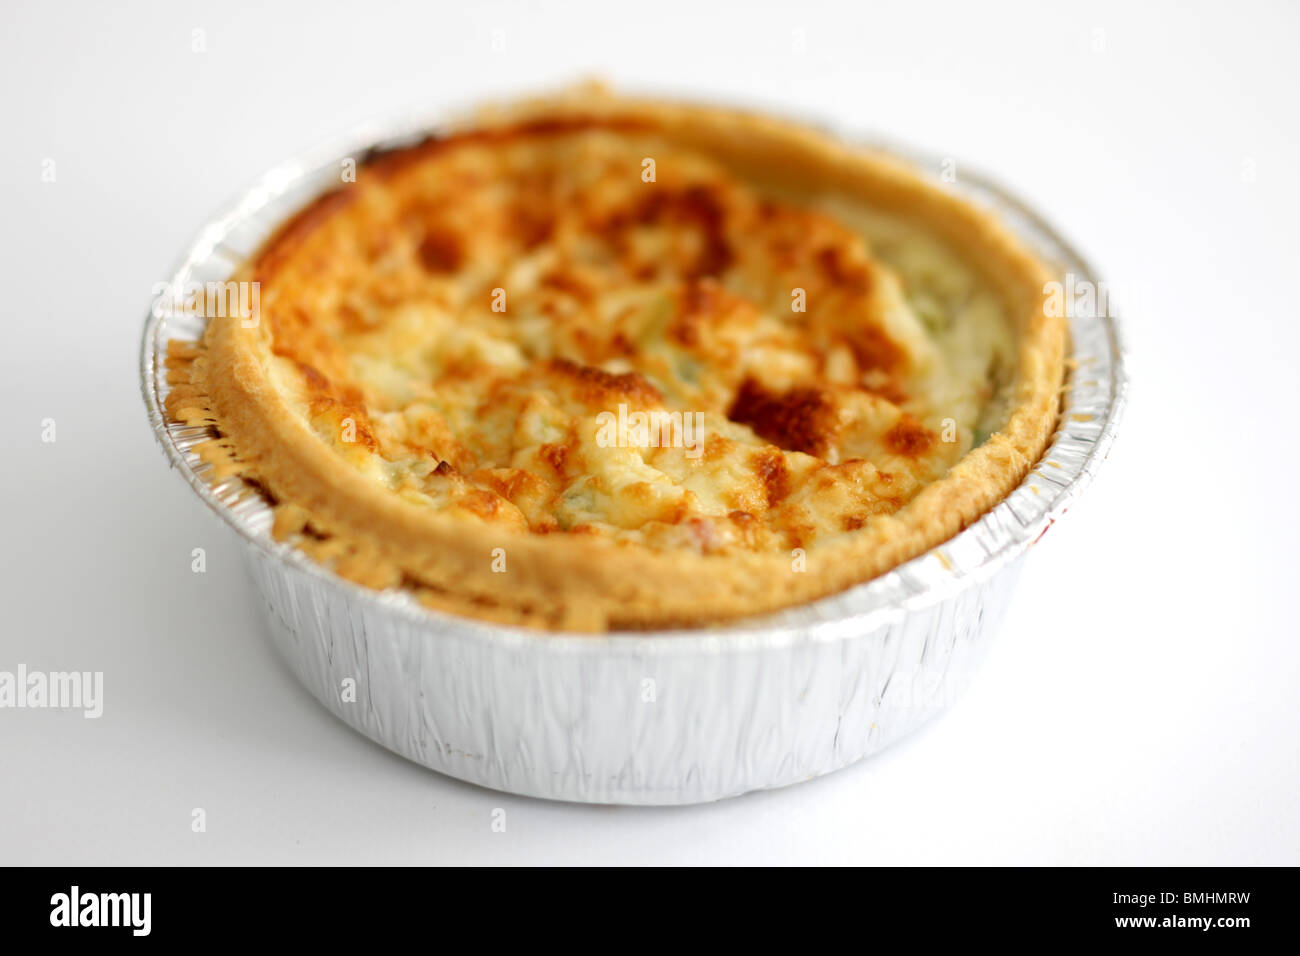 Weight Watchers Bacon and Leek Quiche Stock Photo